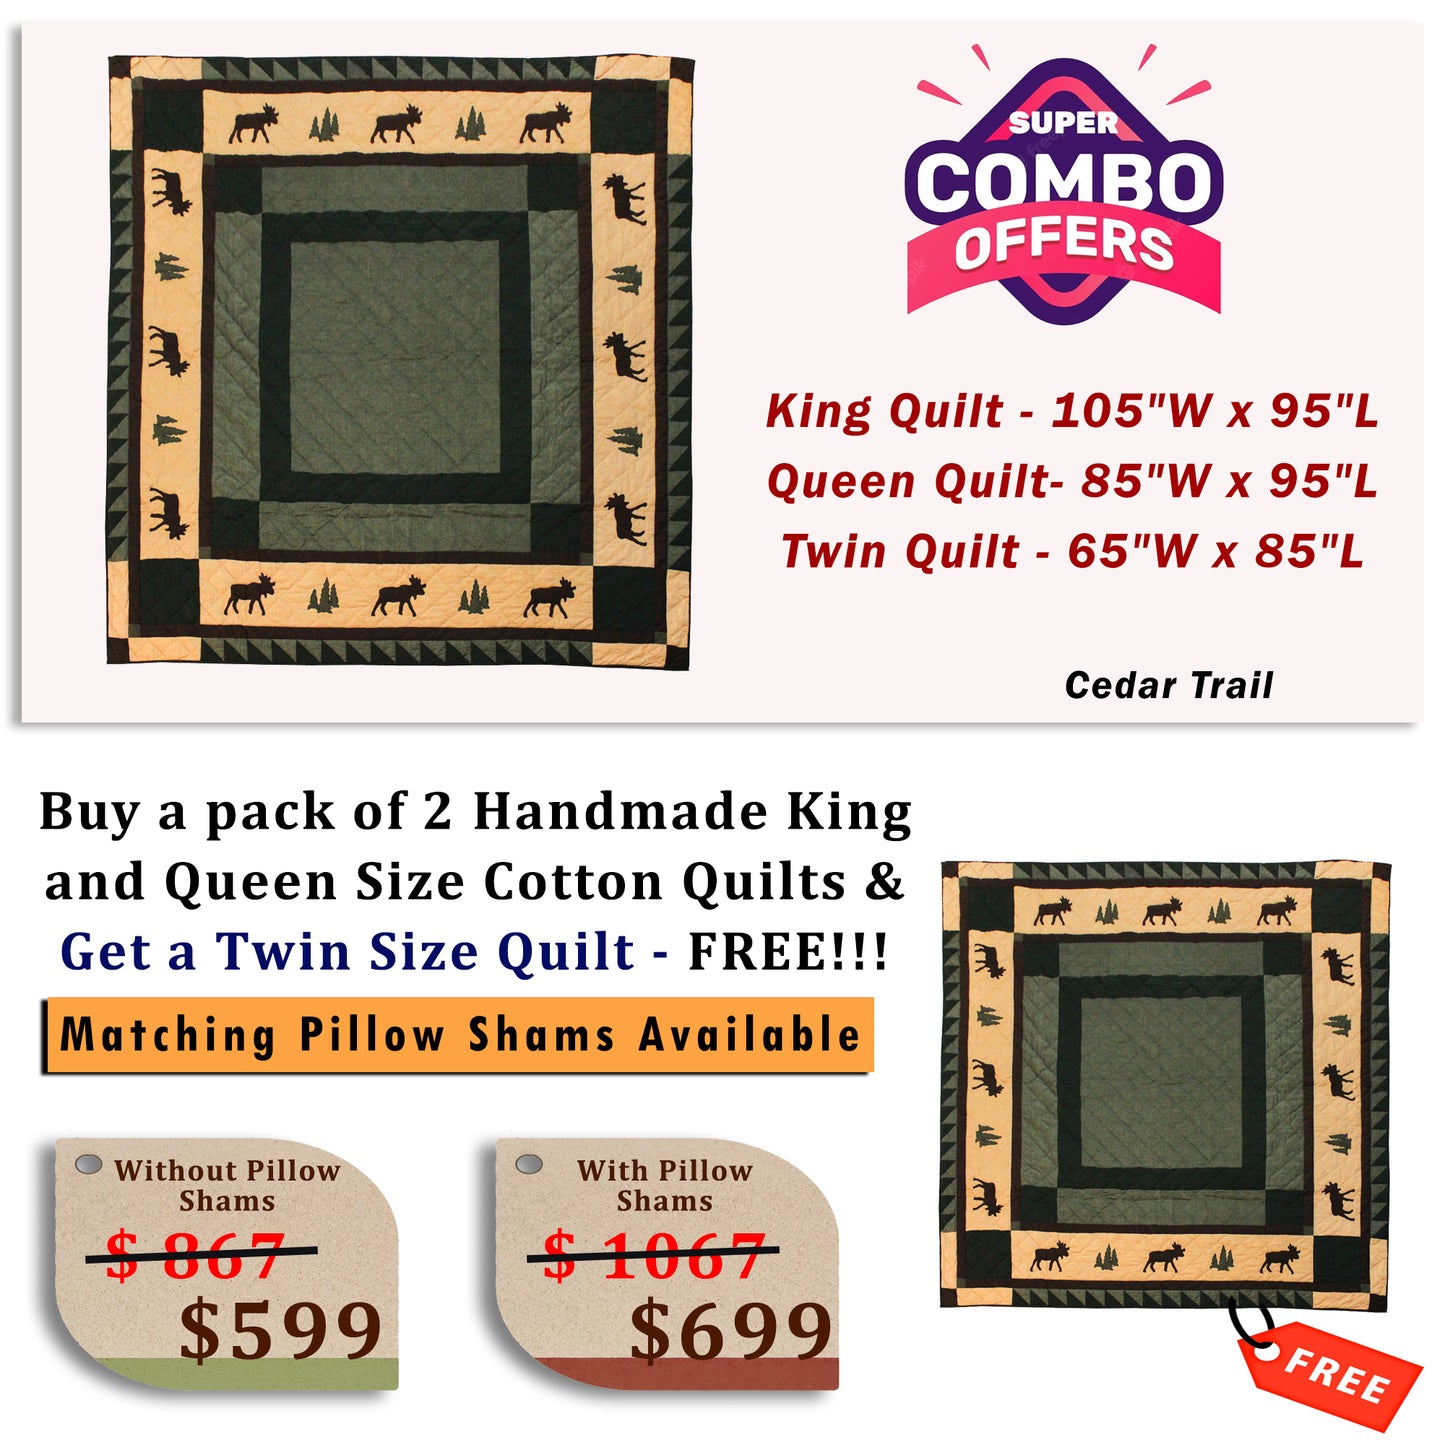 Cedar Trail - Buy a pack of King and Queen Size Quilt, and get a Twin Size Quilt FREE!!!